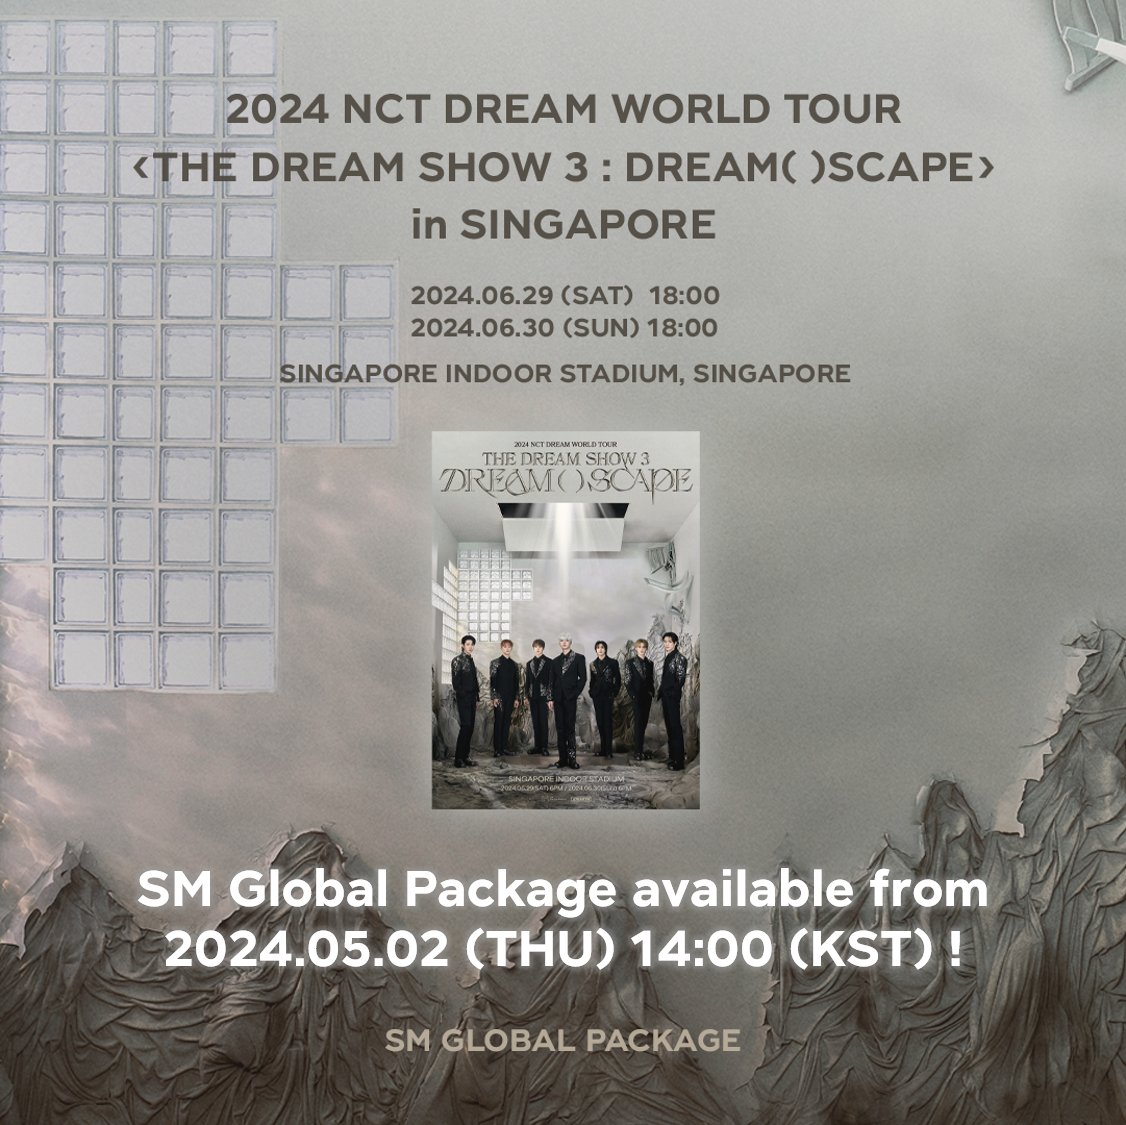 [2024 NCT DREAM WORLD TOUR <THE DREAM SHOW 3 : DREAM( )SCAPE> in SINGAPORE] SM Global Package available from 2024.05.02 (THU) 14:00 (KST) ! 💚global.smtowntravel.com #NCTDREAM #THEDREAMSHOW3 #NCTDREAM_WORLDTOUR #SMGLOBALPACKAGE #GLOBALPACKAGE #全球套餐 #グロパ